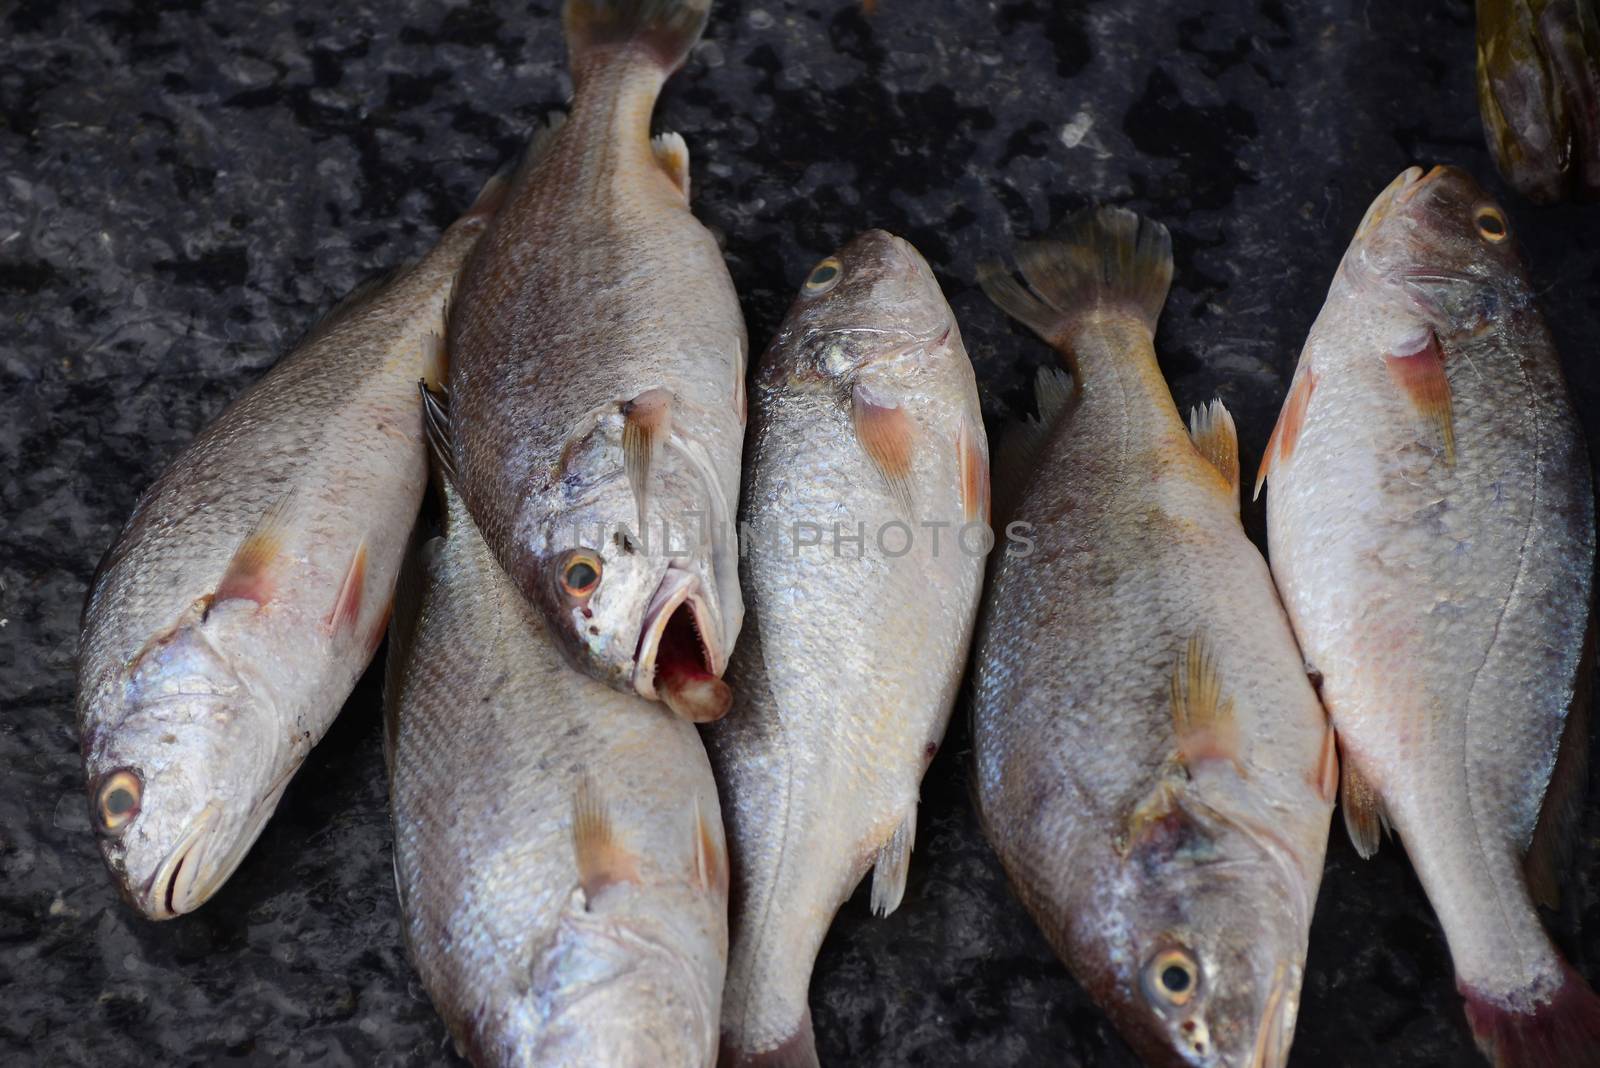 croaker fish Sell in fresh seafood market by ideation90